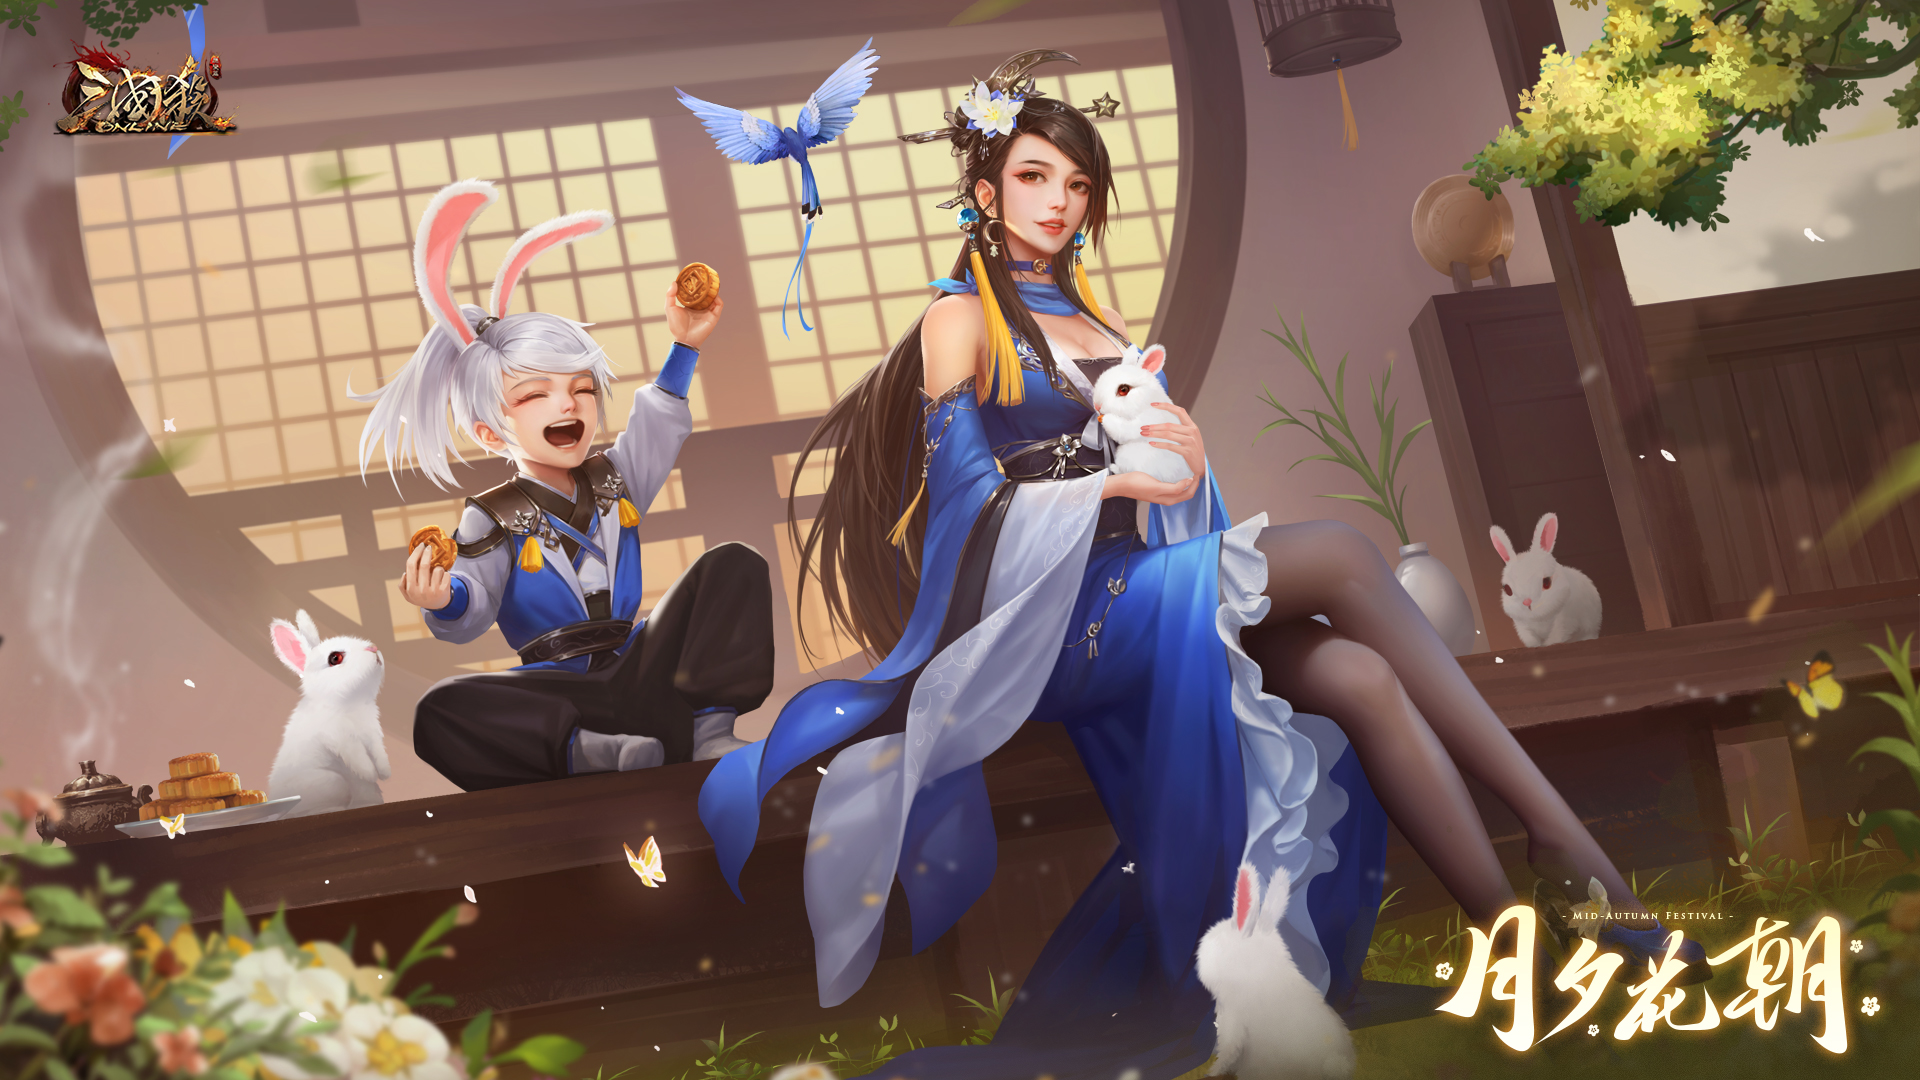 Three Kingdoms Game Characters Video Game Girls Video Game Boys Video Game Art Artwork Rabbits Anima 1920x1080